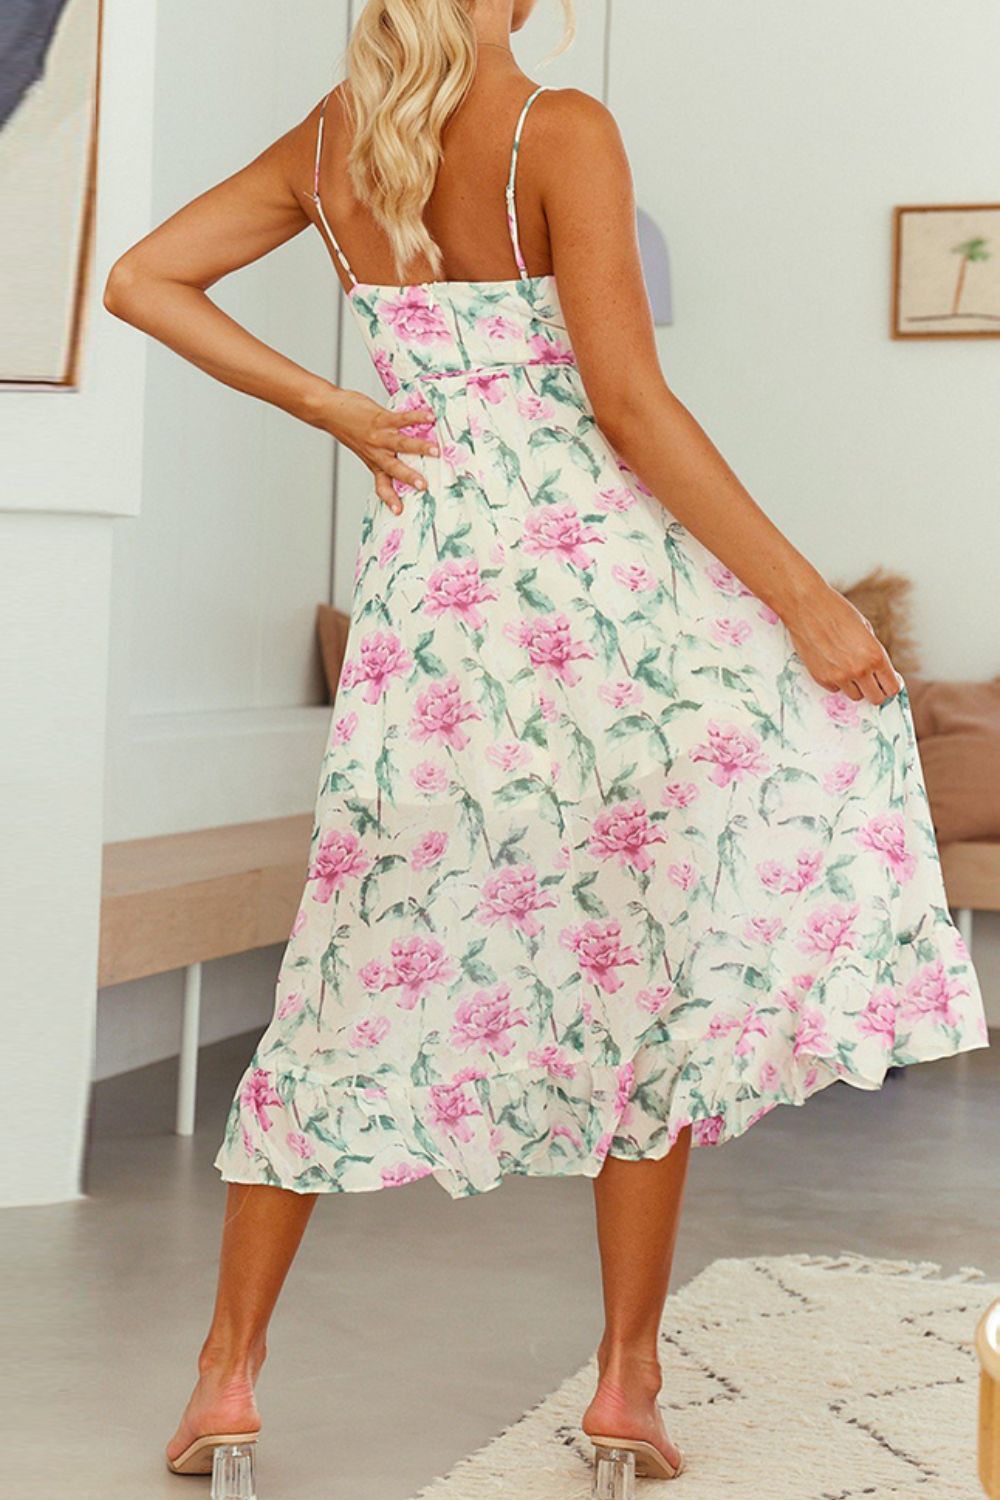 Chic Floral Midi Dress: Perfect Summer Attire for Beach Weddings & Parties